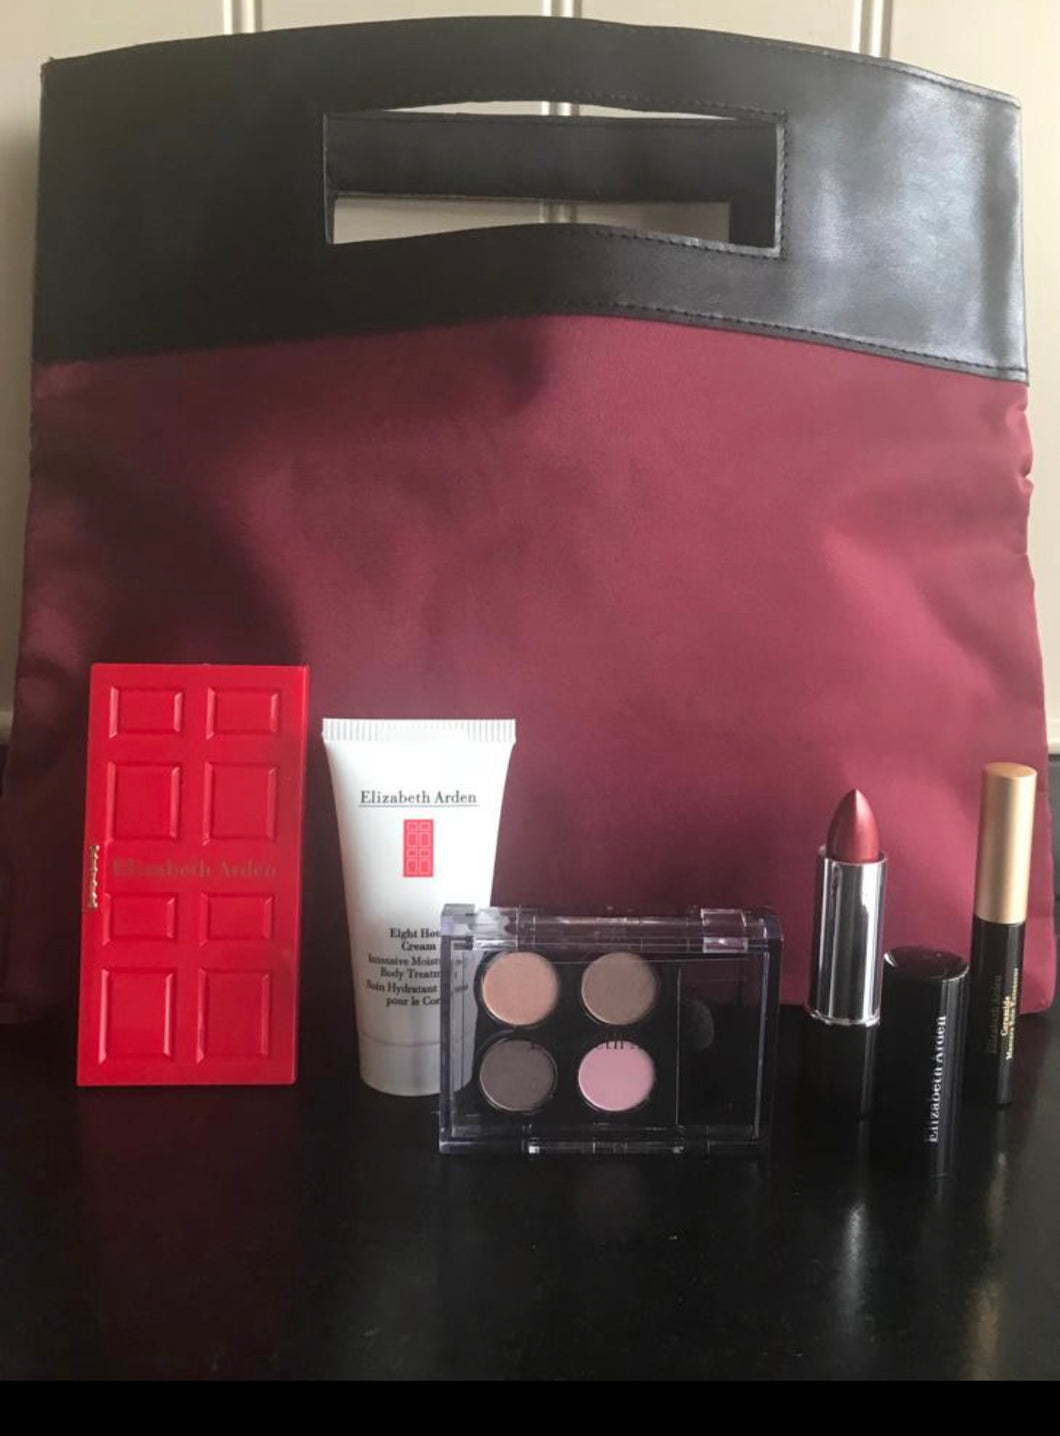 Elizabeth Arden Bag with products